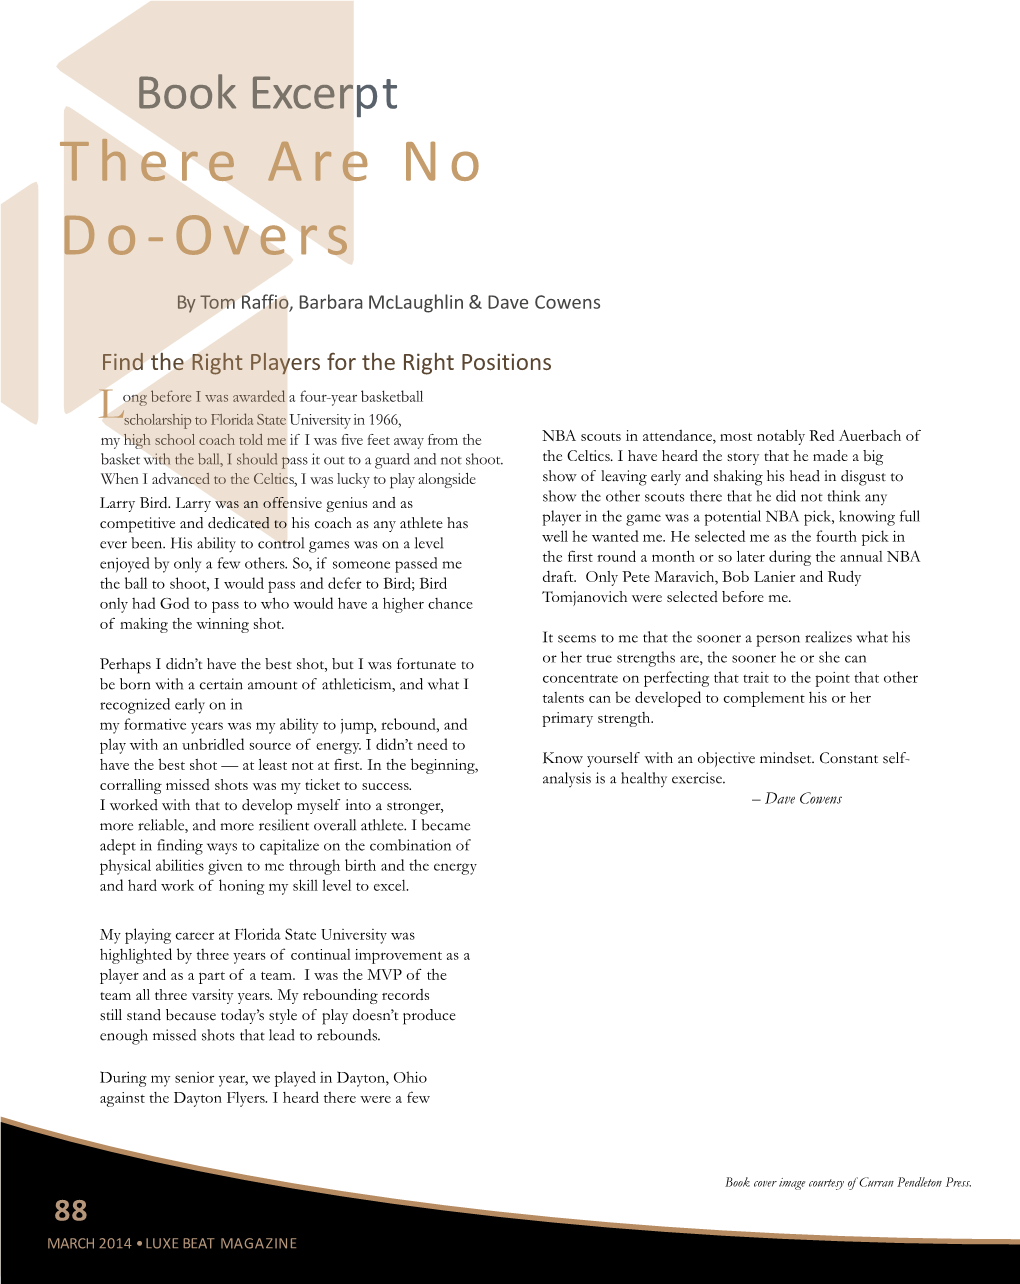 Book Excerpt There Are No Do-Overs